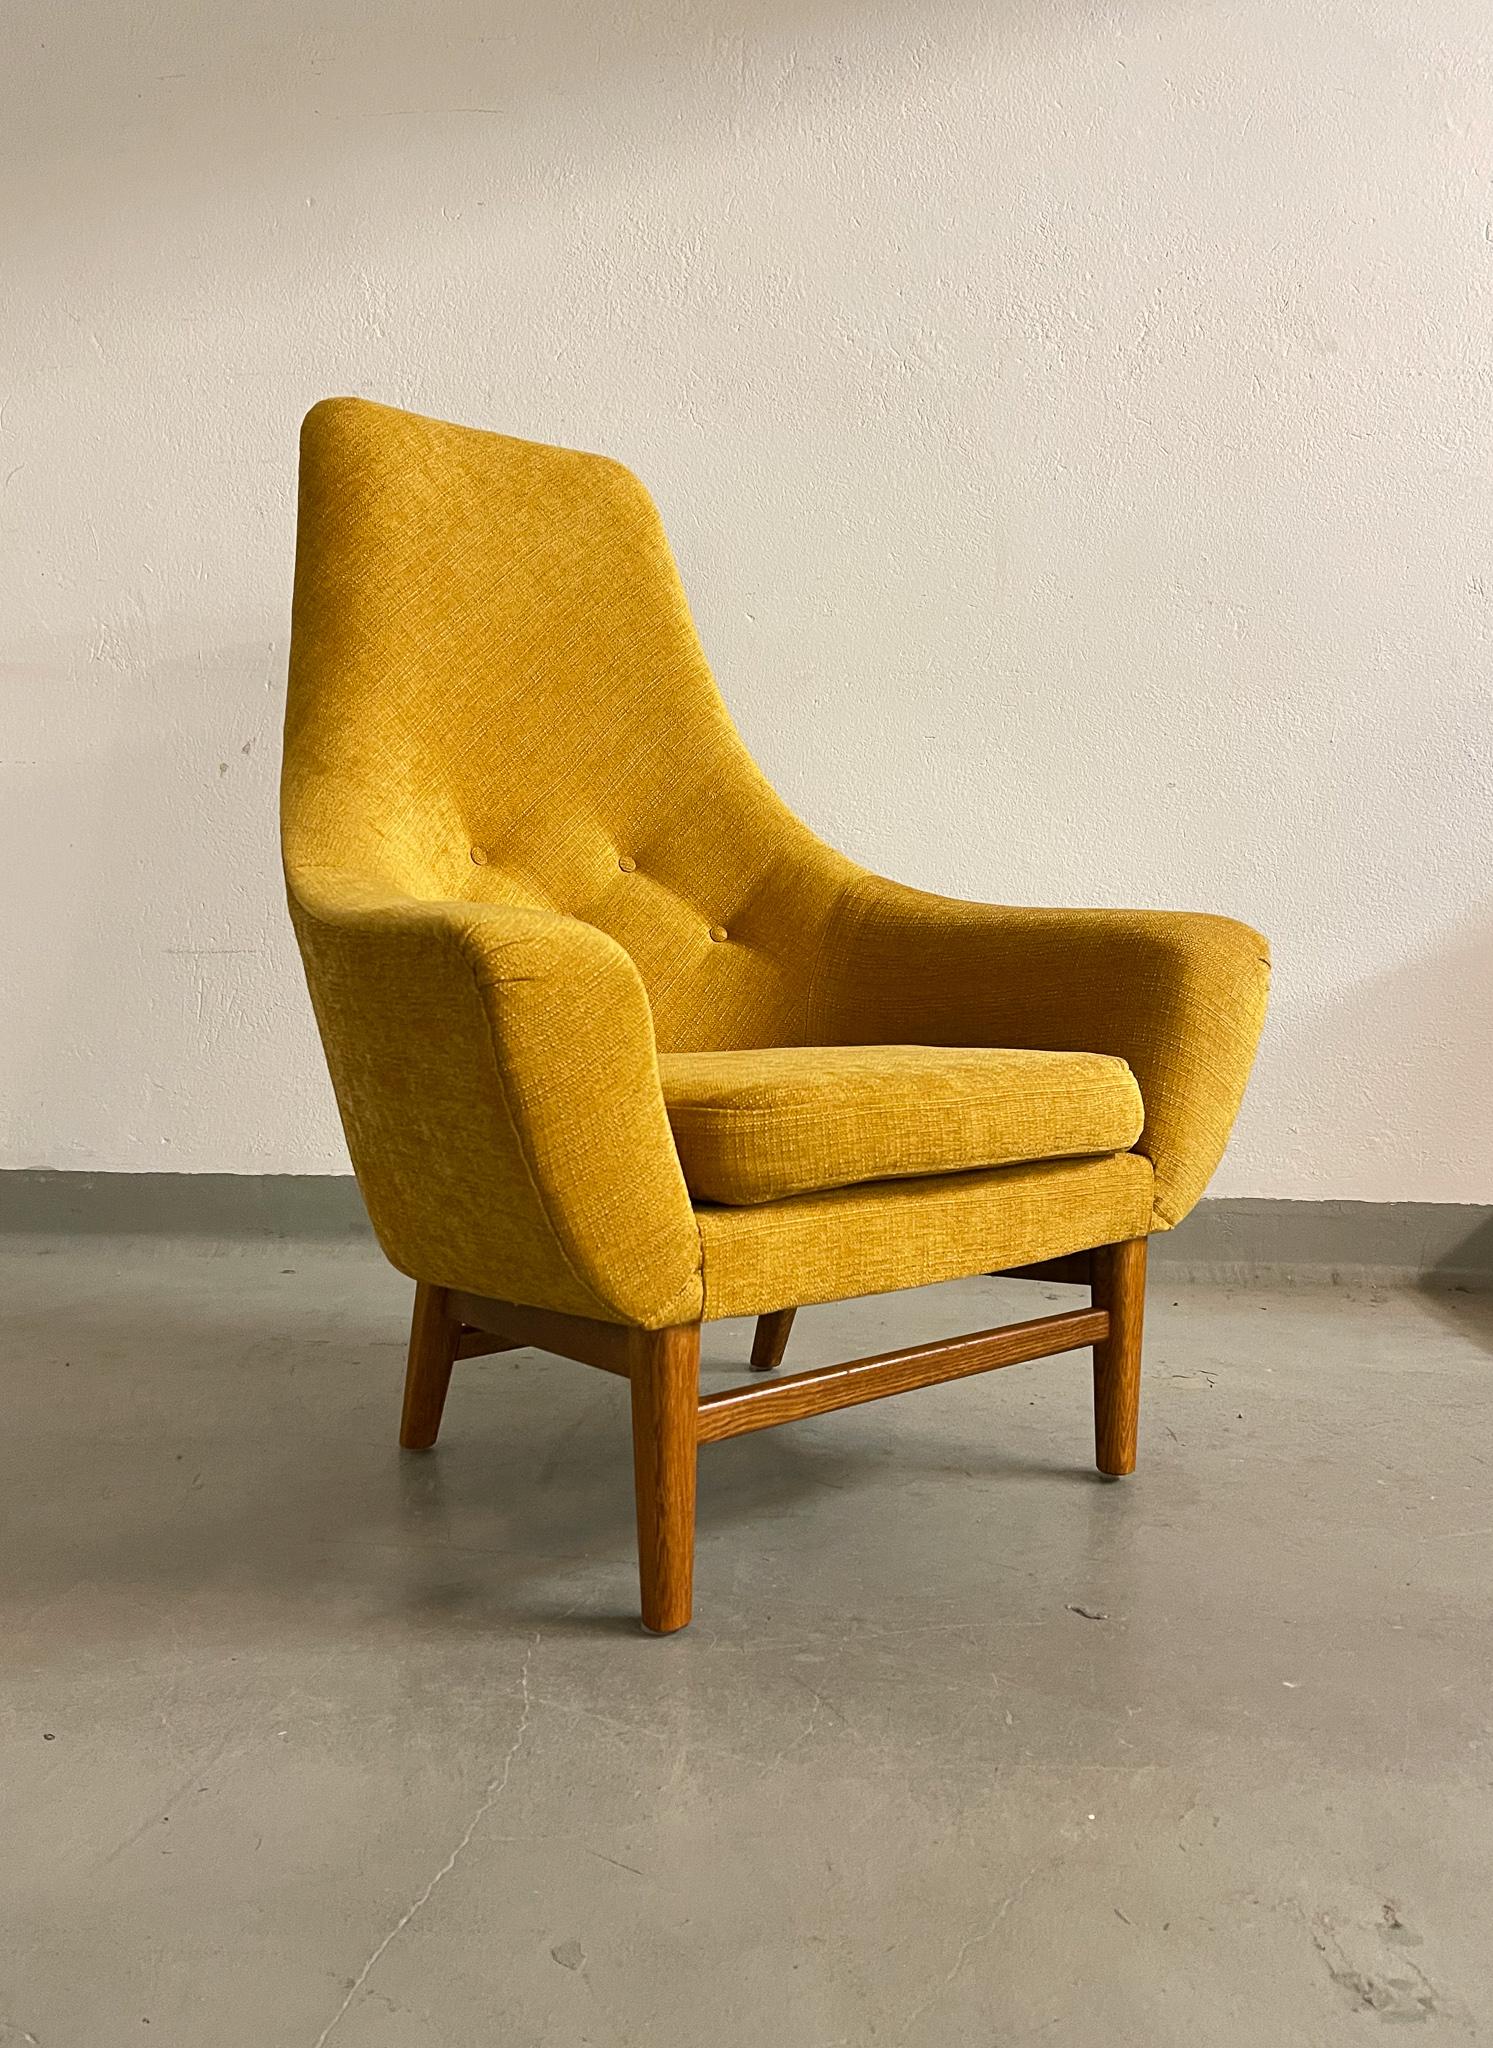 This unusual futuristic lounge chair was produced by S.M Wincrantz in Skovde, Sweden, circa 1955.
The chair has been reupholstered in a yellow mustard textile. Its attached to a teak frame.

Very good condition. 

Dimensions: H 105 cm, W 90, D